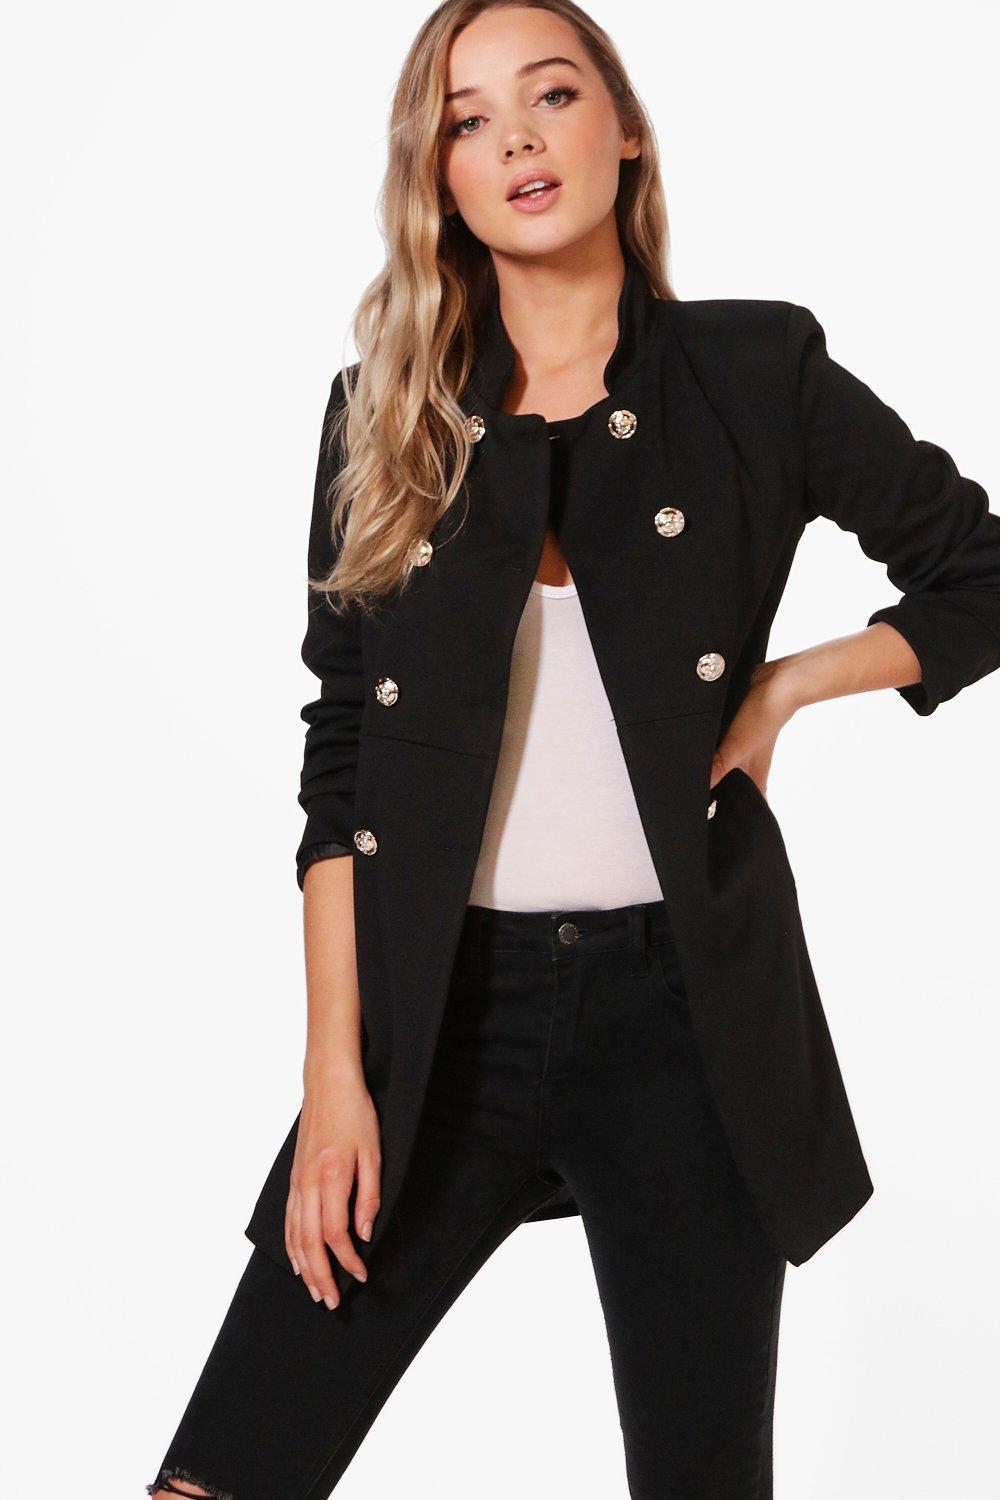 Boohoo Synthetic Womens Military Style Coat in Black - Lyst